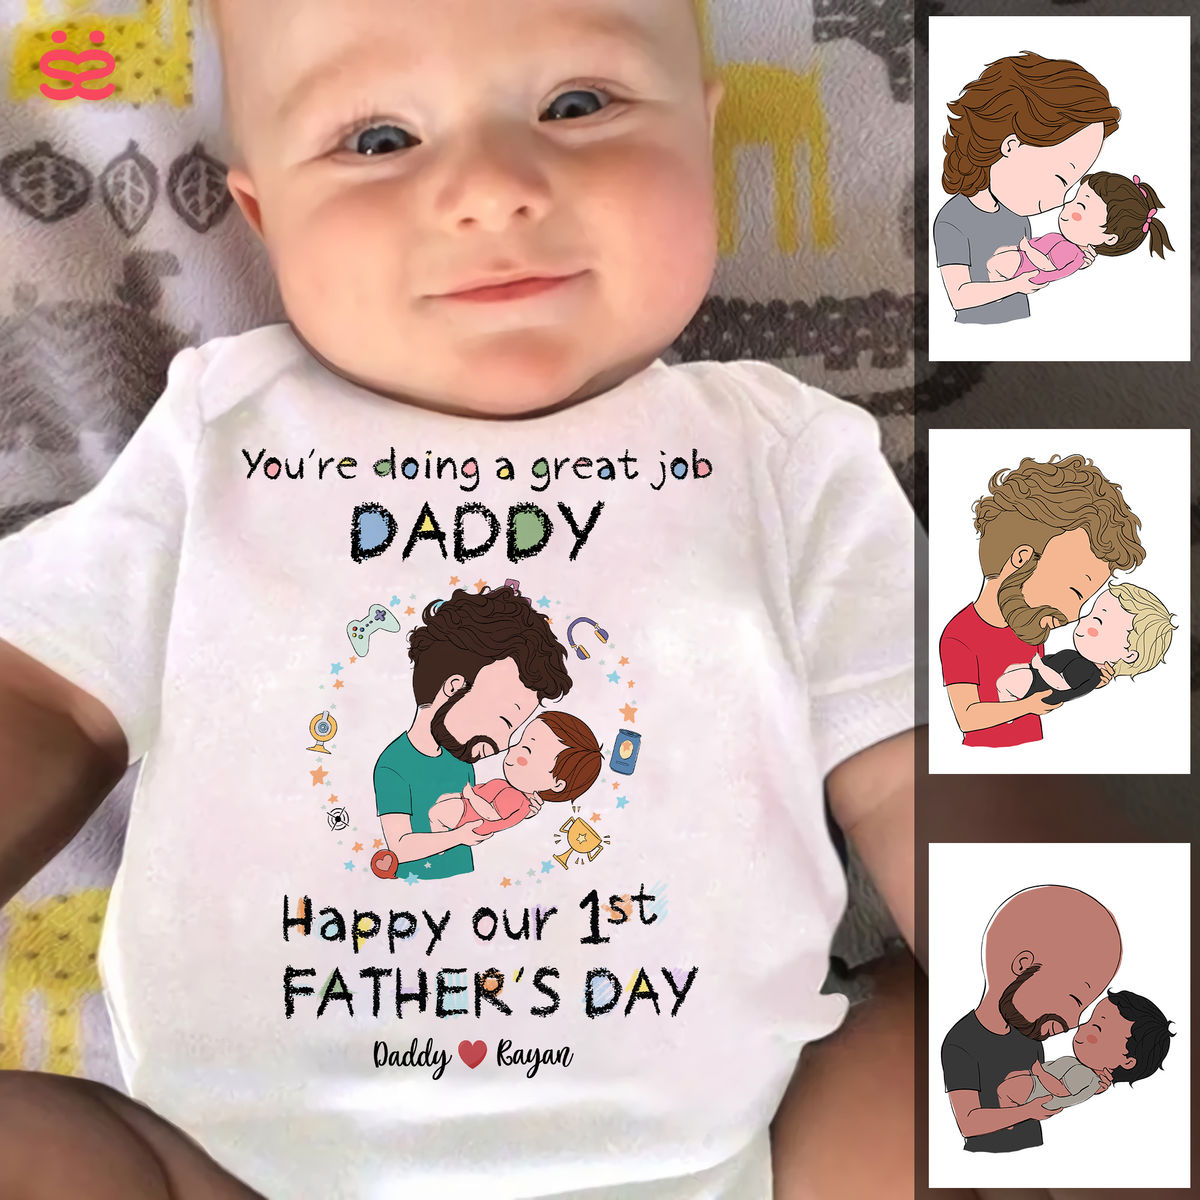 Custom Baby Onesies - You're doing a great job daddy Happy 1st Father's Day - Baby Shower Gift - Personalized Shirt